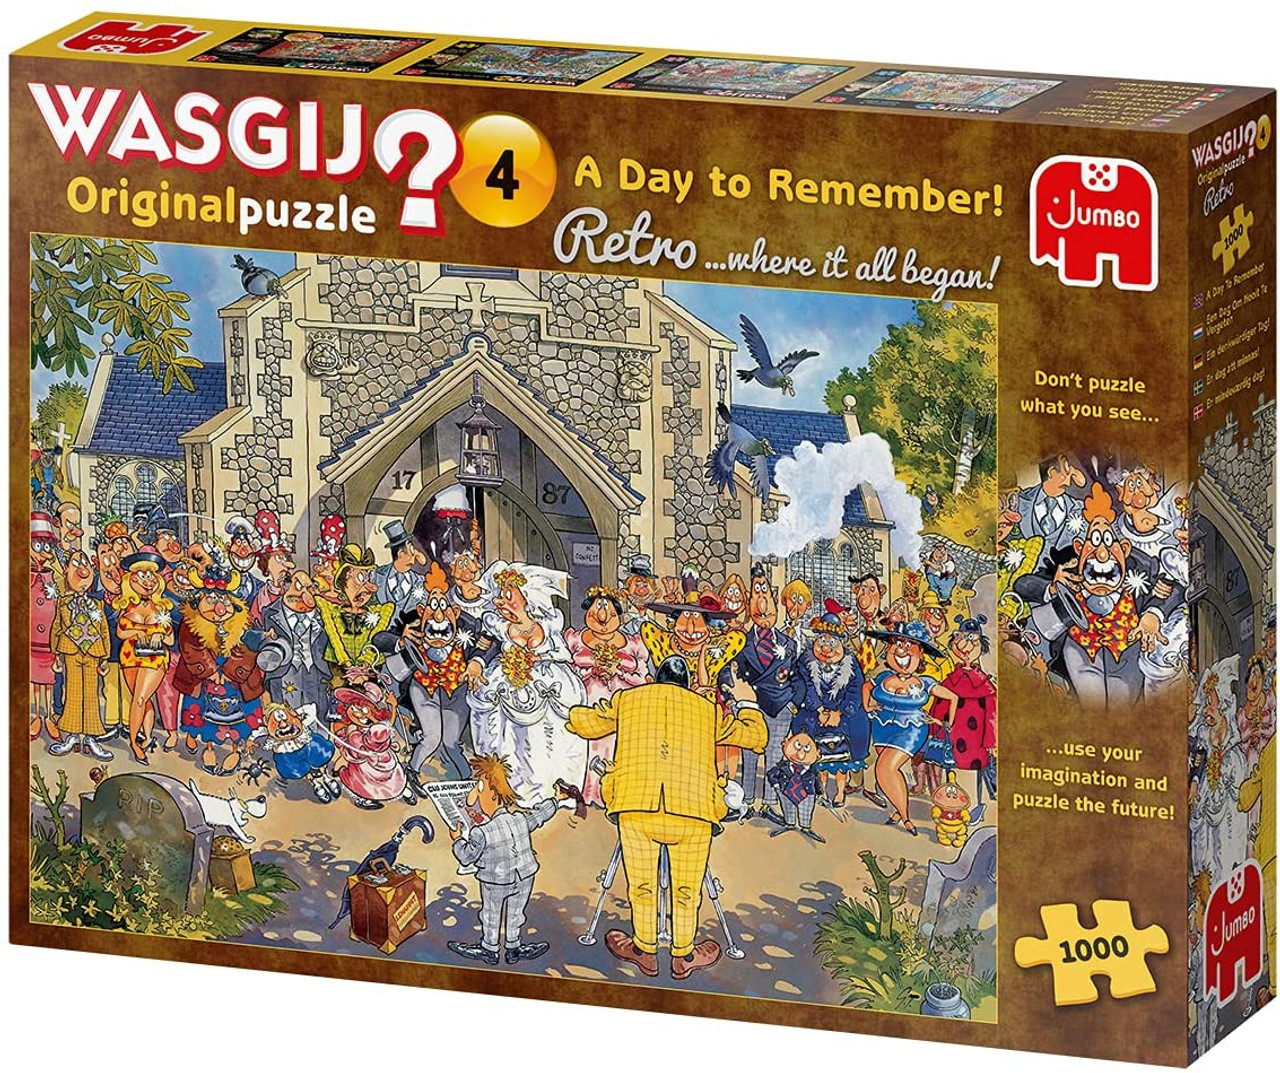 houten Hymne belangrijk A Day to Remember" JVH *WASGIJ Original #4* 1000 Piece Jigsaw Puzzle | Jumbo  - Tri-M Specialty Products